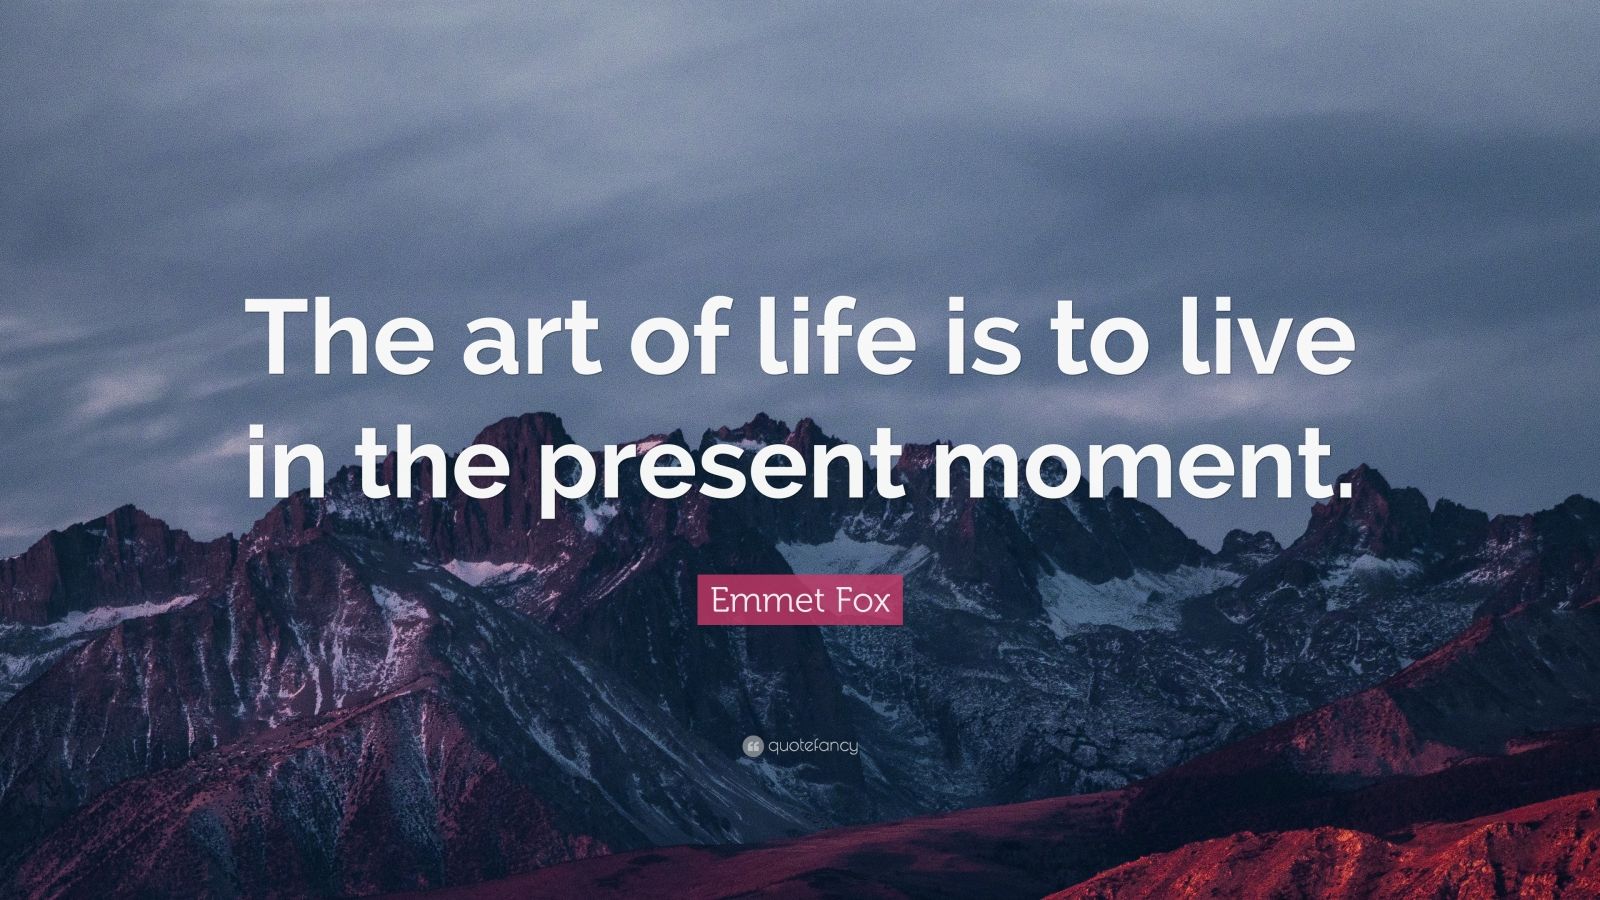 Emmet Fox Quote: “The art of life is to live in the present moment ...